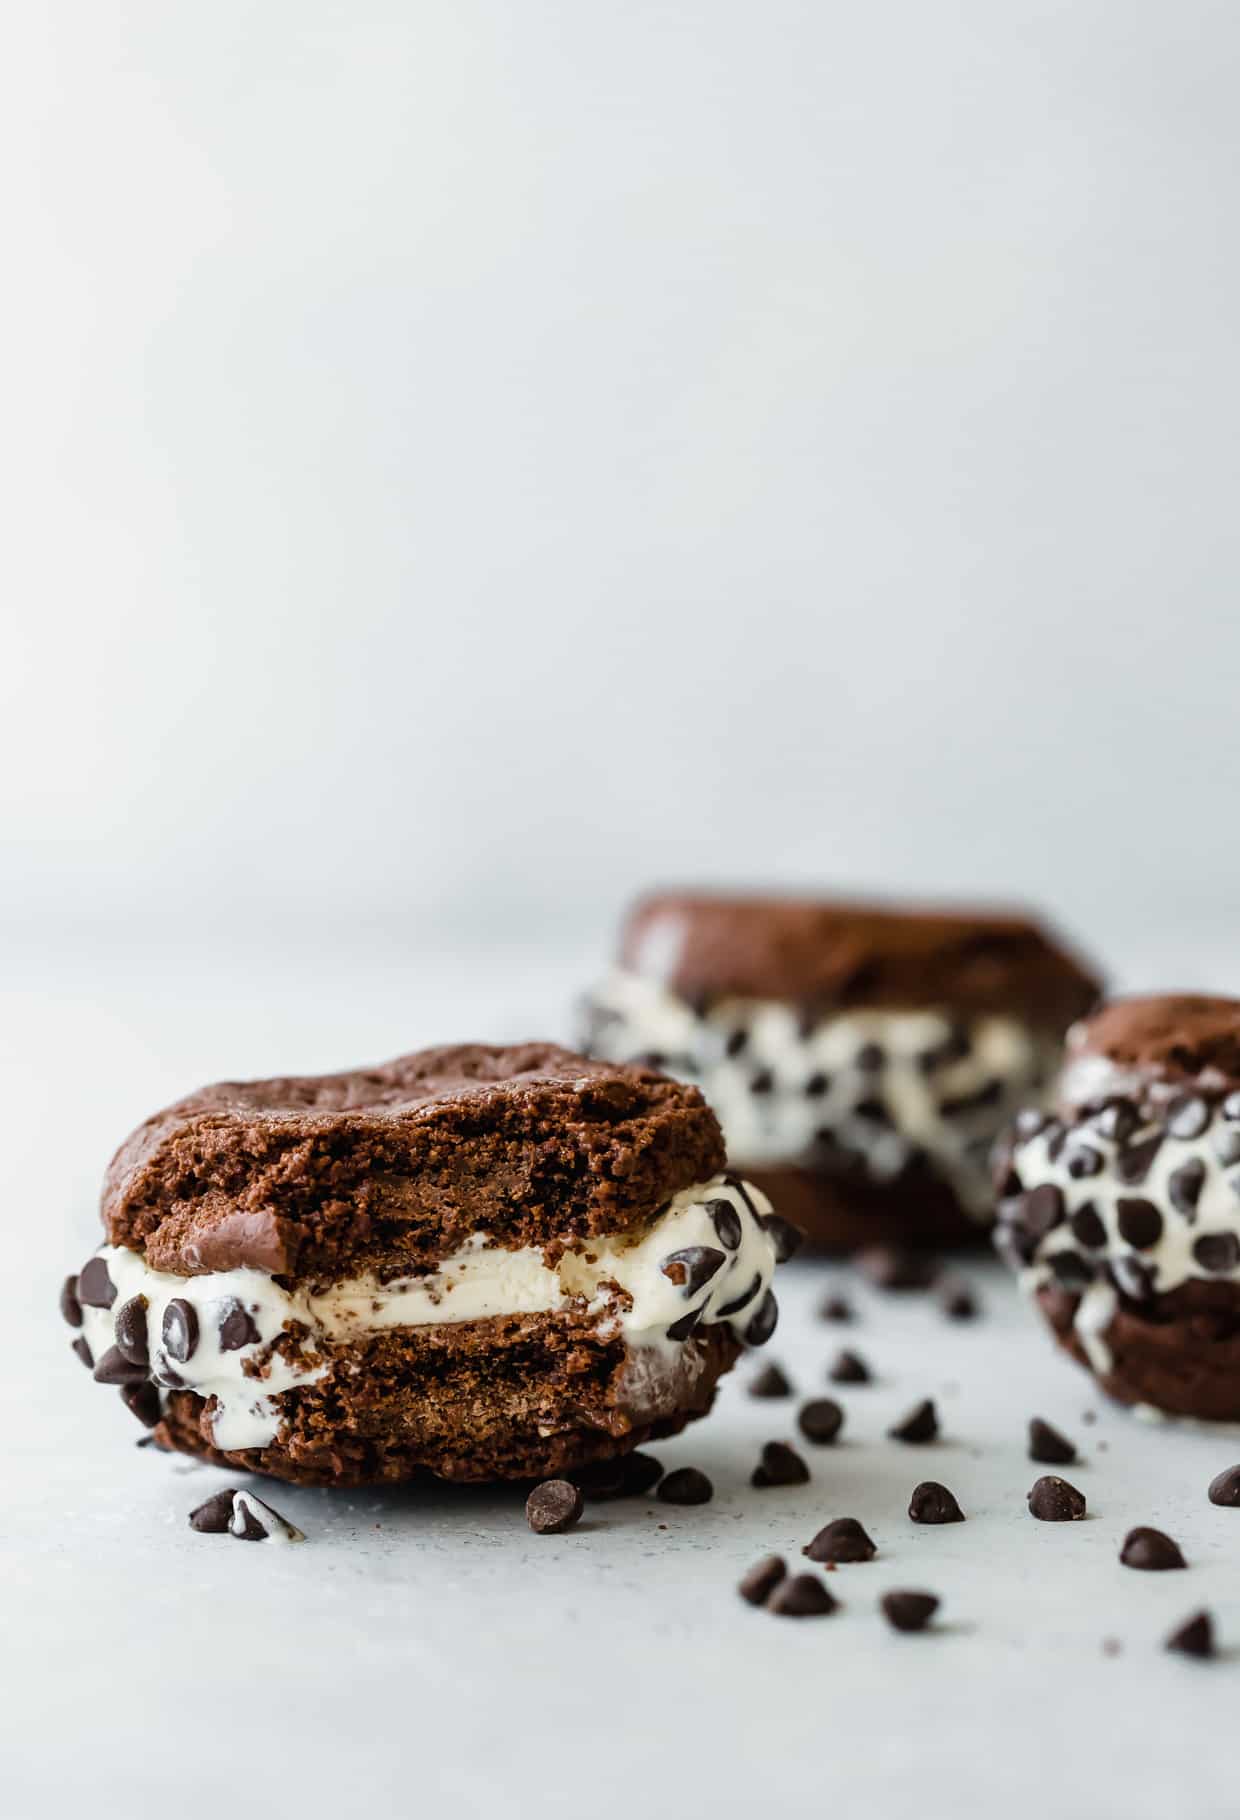 Chocolate Cookie Ice Cream Sandwiches are the perfect treat for summer! They're easy to make and absolutely delicious! Get the full recipe on saltandbaker.com